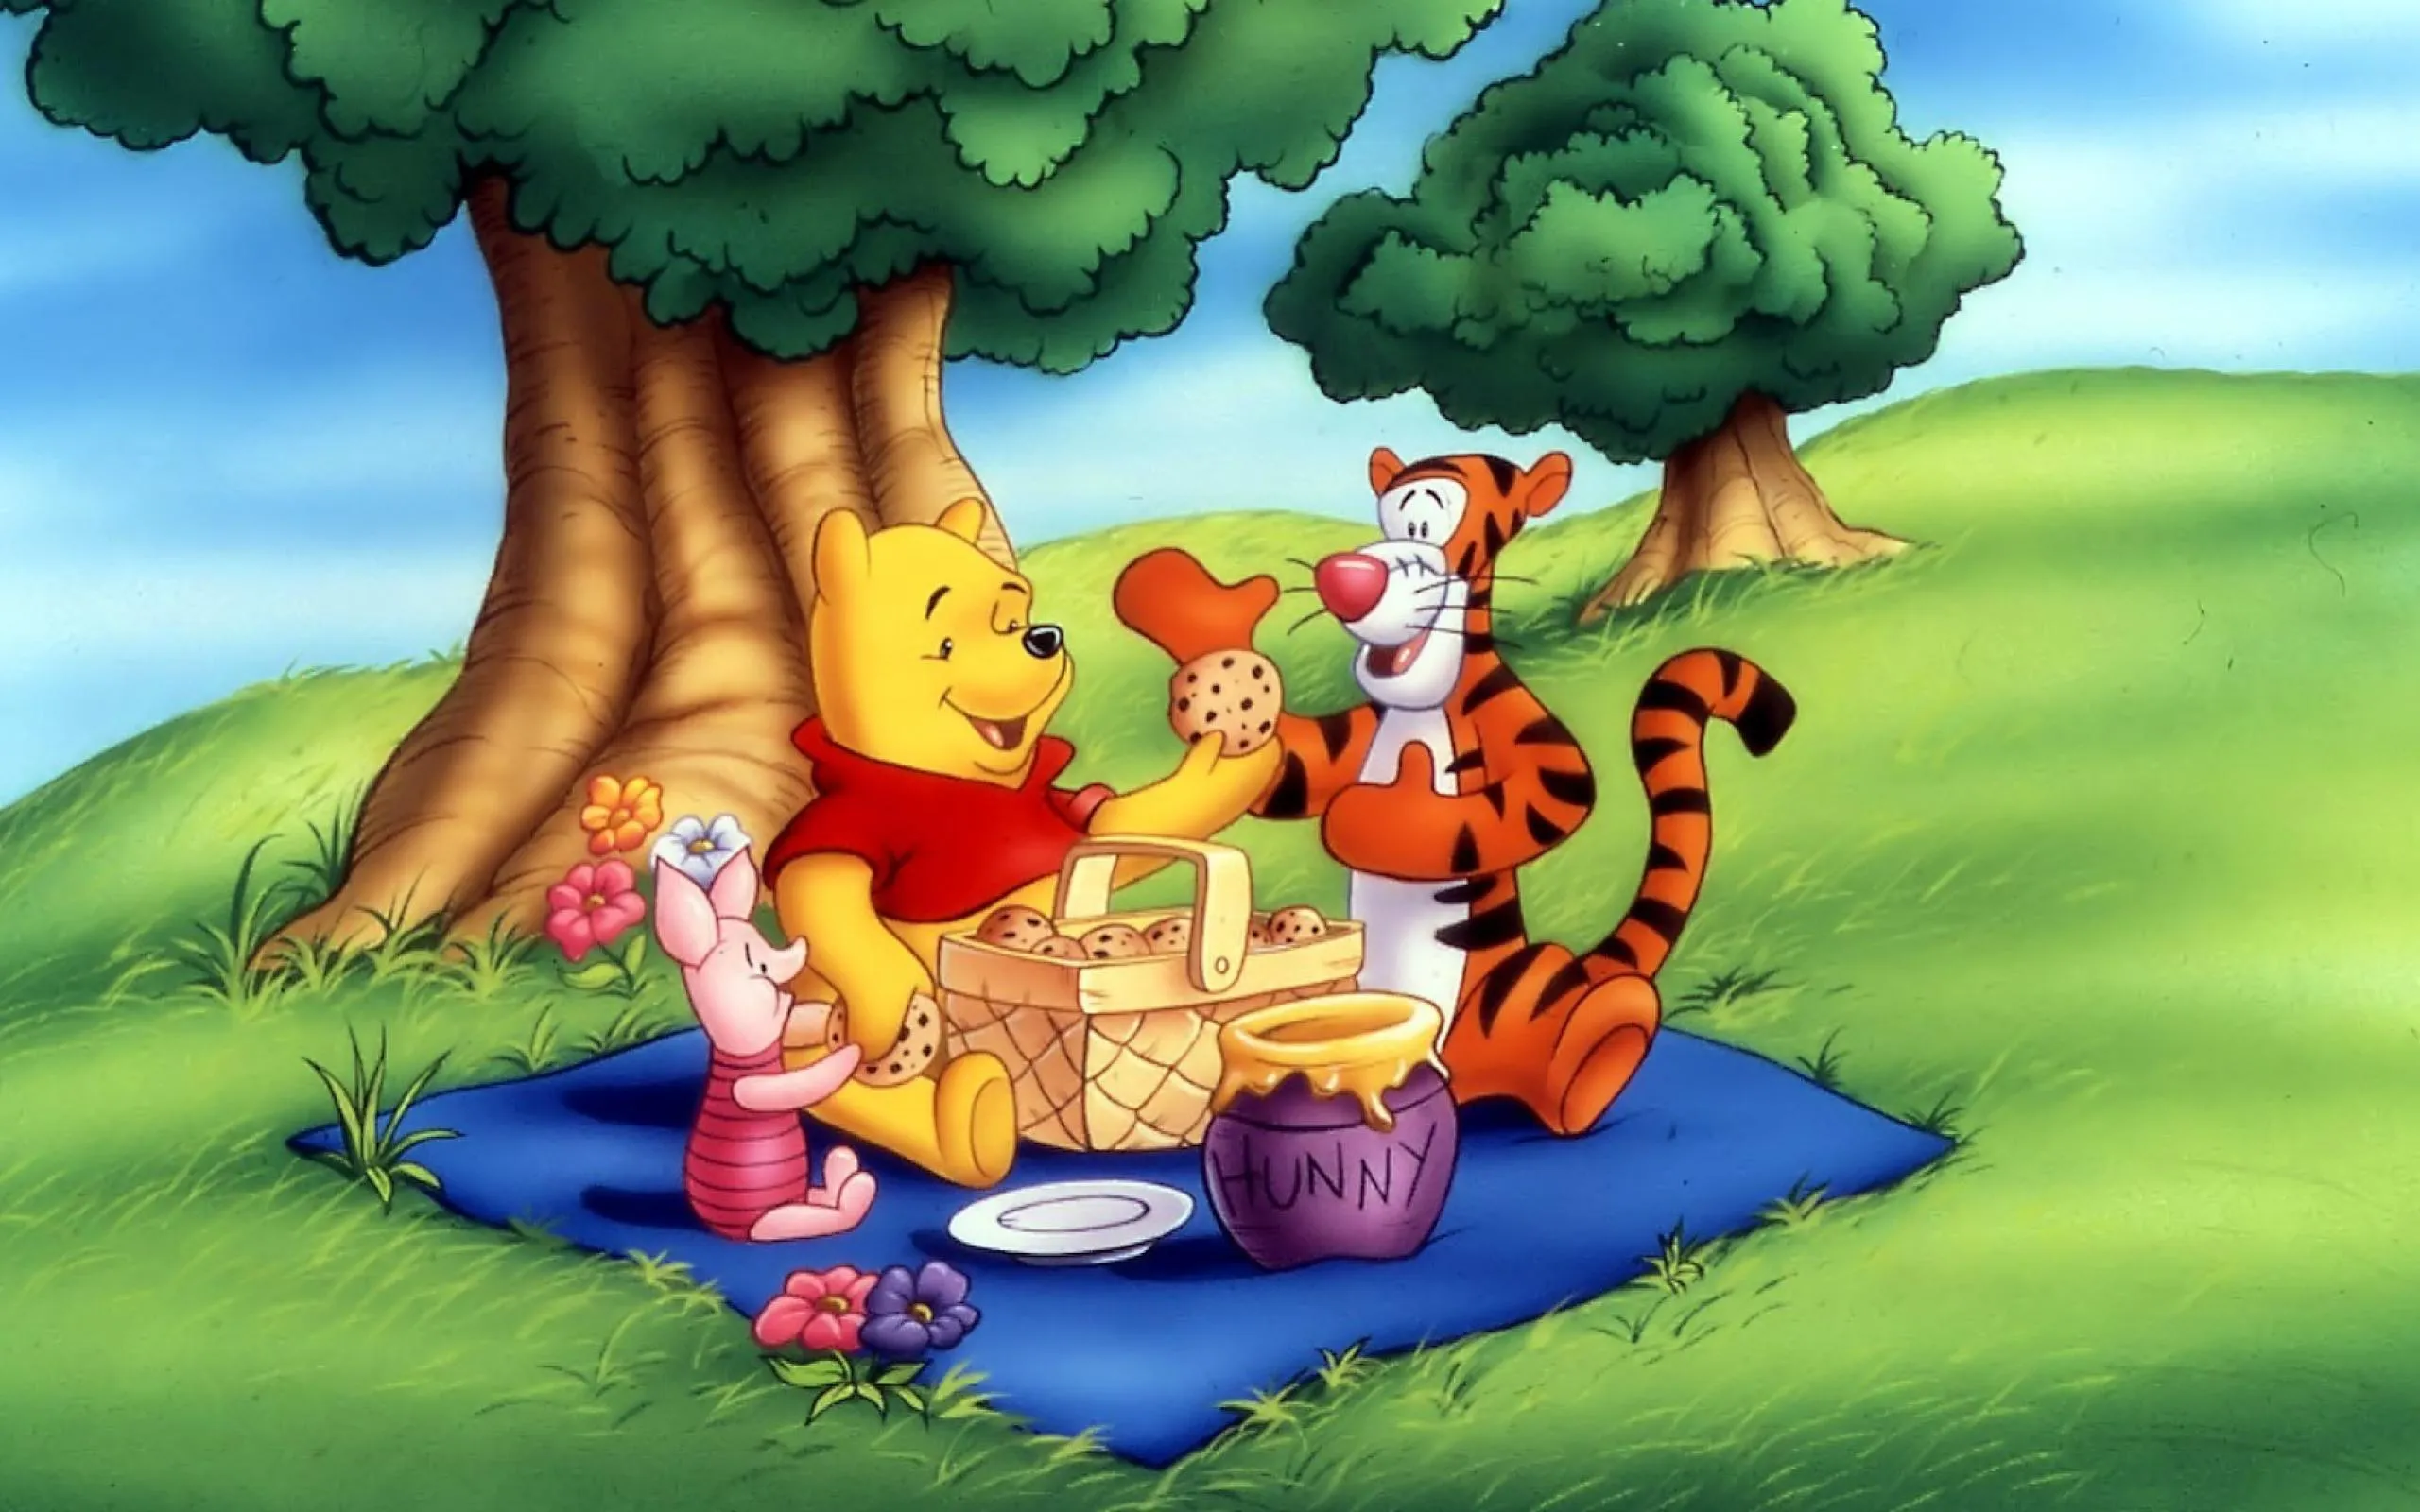 83 Winnie The Pooh Wallpapers | Winnie The Pooh Backgrounds